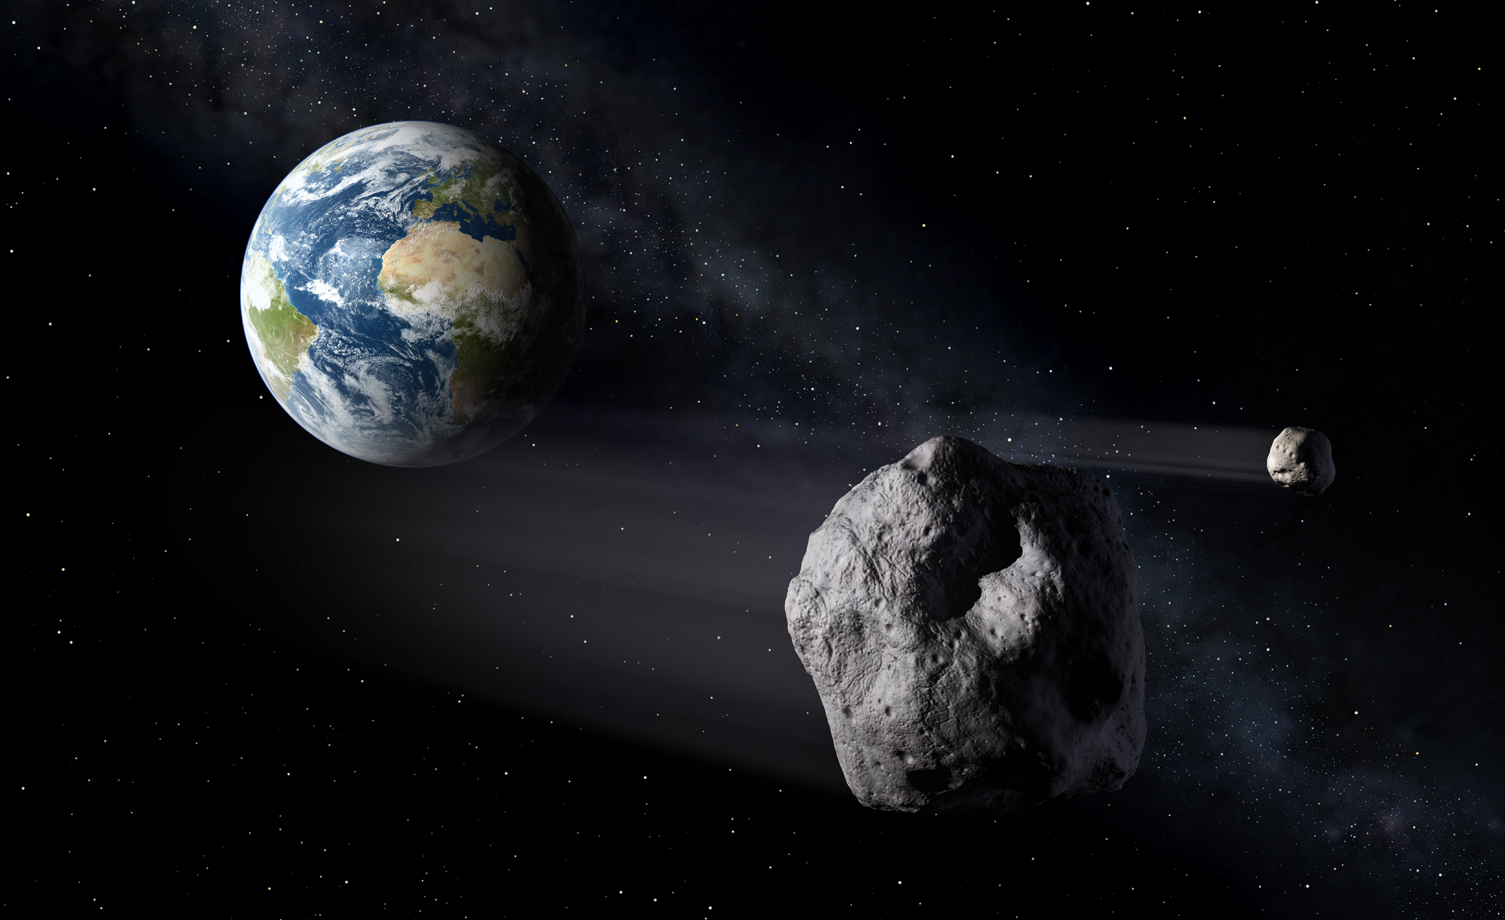 Artist rendition of asteroids nearing Earth.